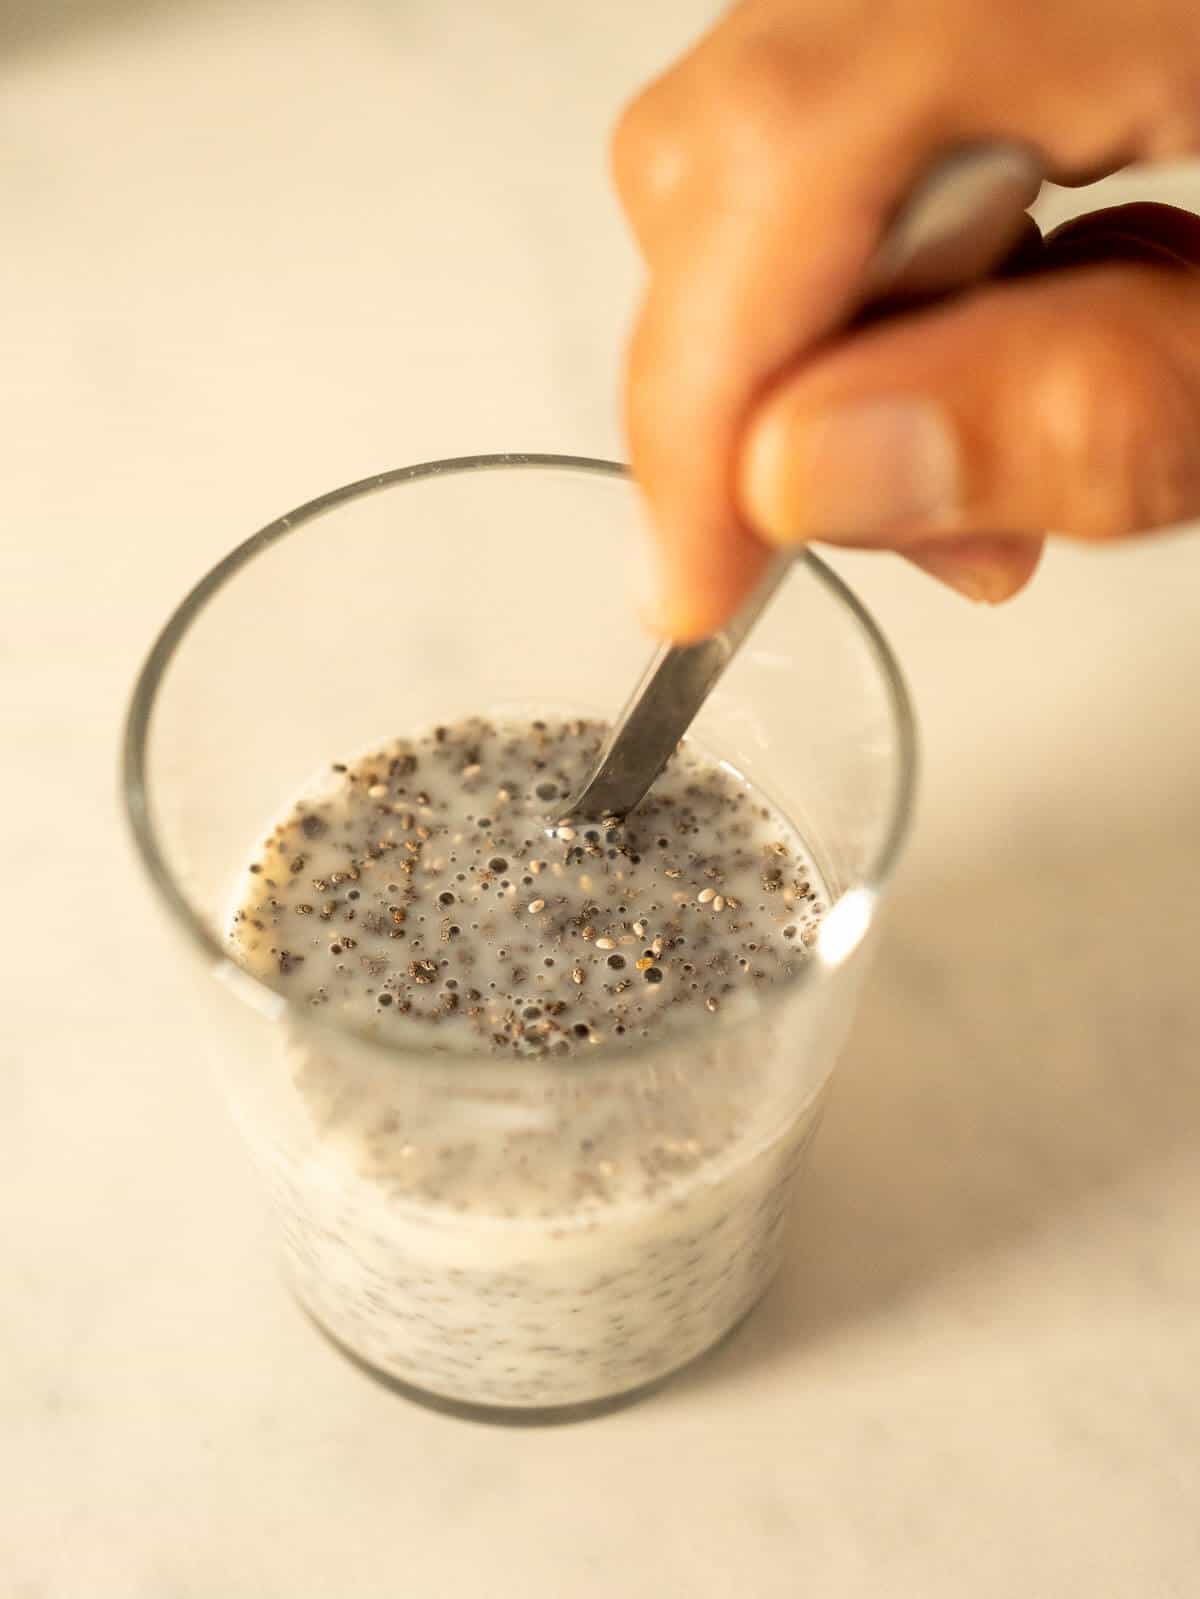 stir the chia seeds in the oat milk with a teaspoon.